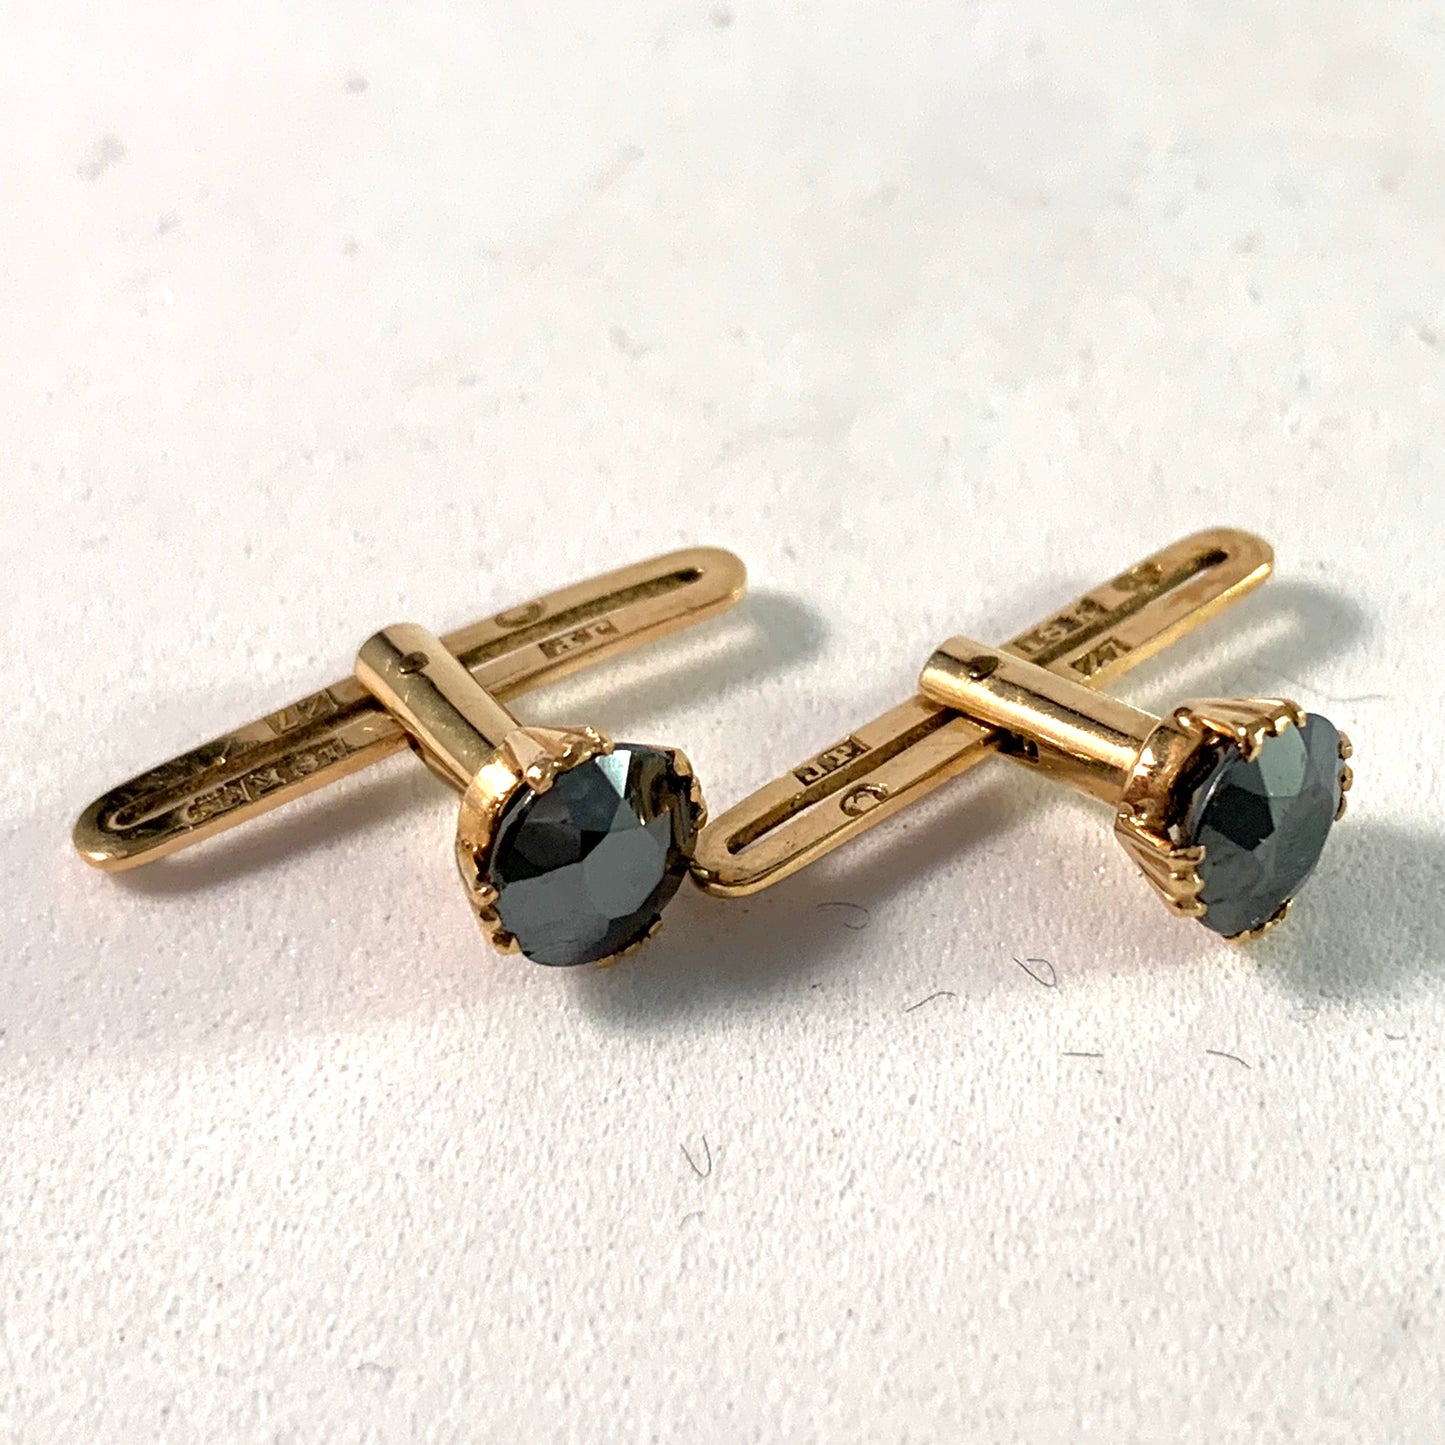 J Pettersson, Stockholm 1926 18K Gold and Onyx Shirt Studs Buttons